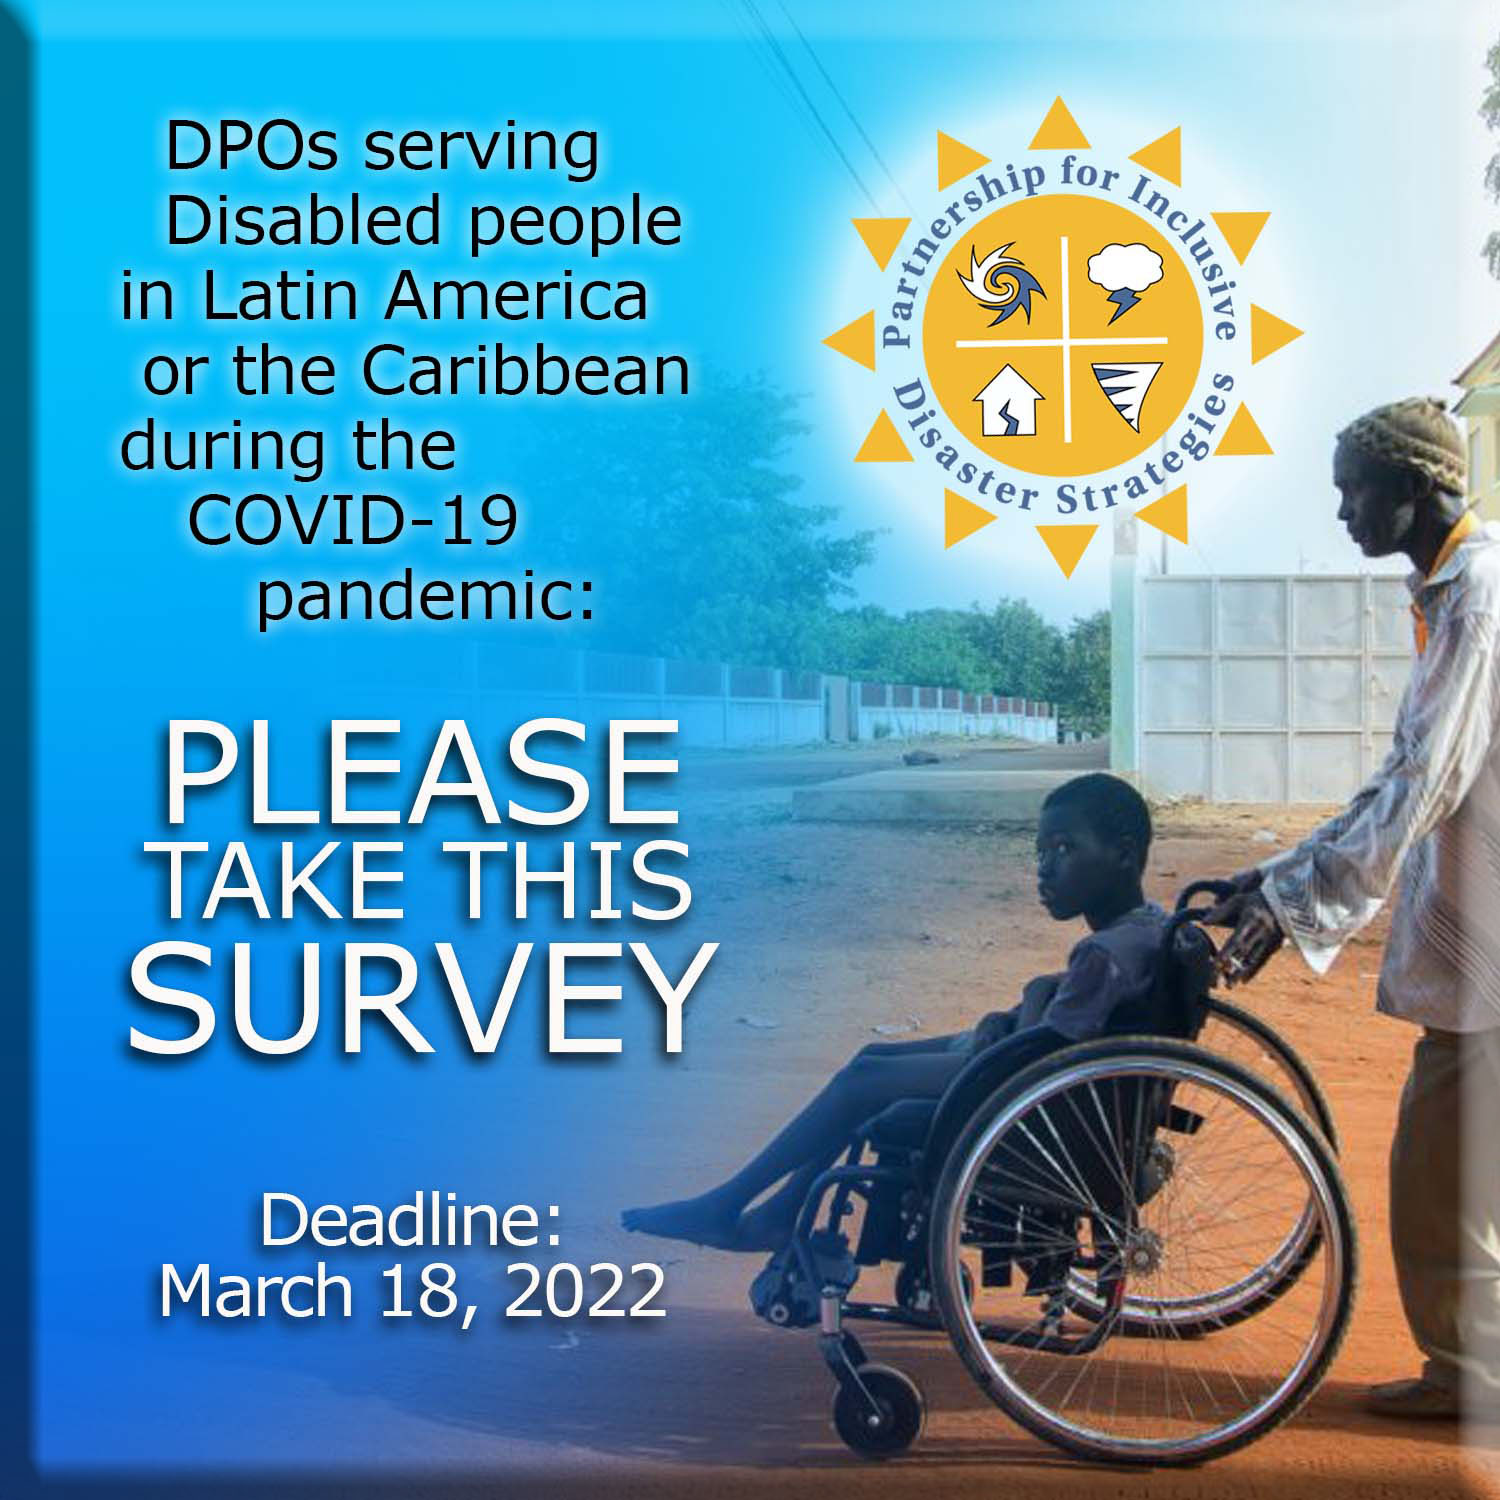 Man pushing boy in wheelchair, both people of color, in a rural Latin American area near the ocean. Text reads: "DPOs serving disabled people in Latin America or the Caribbean during the COVID-19 pandemic: PLEASE TAKE THIS SURVEY. Deadline: March 18, 2022